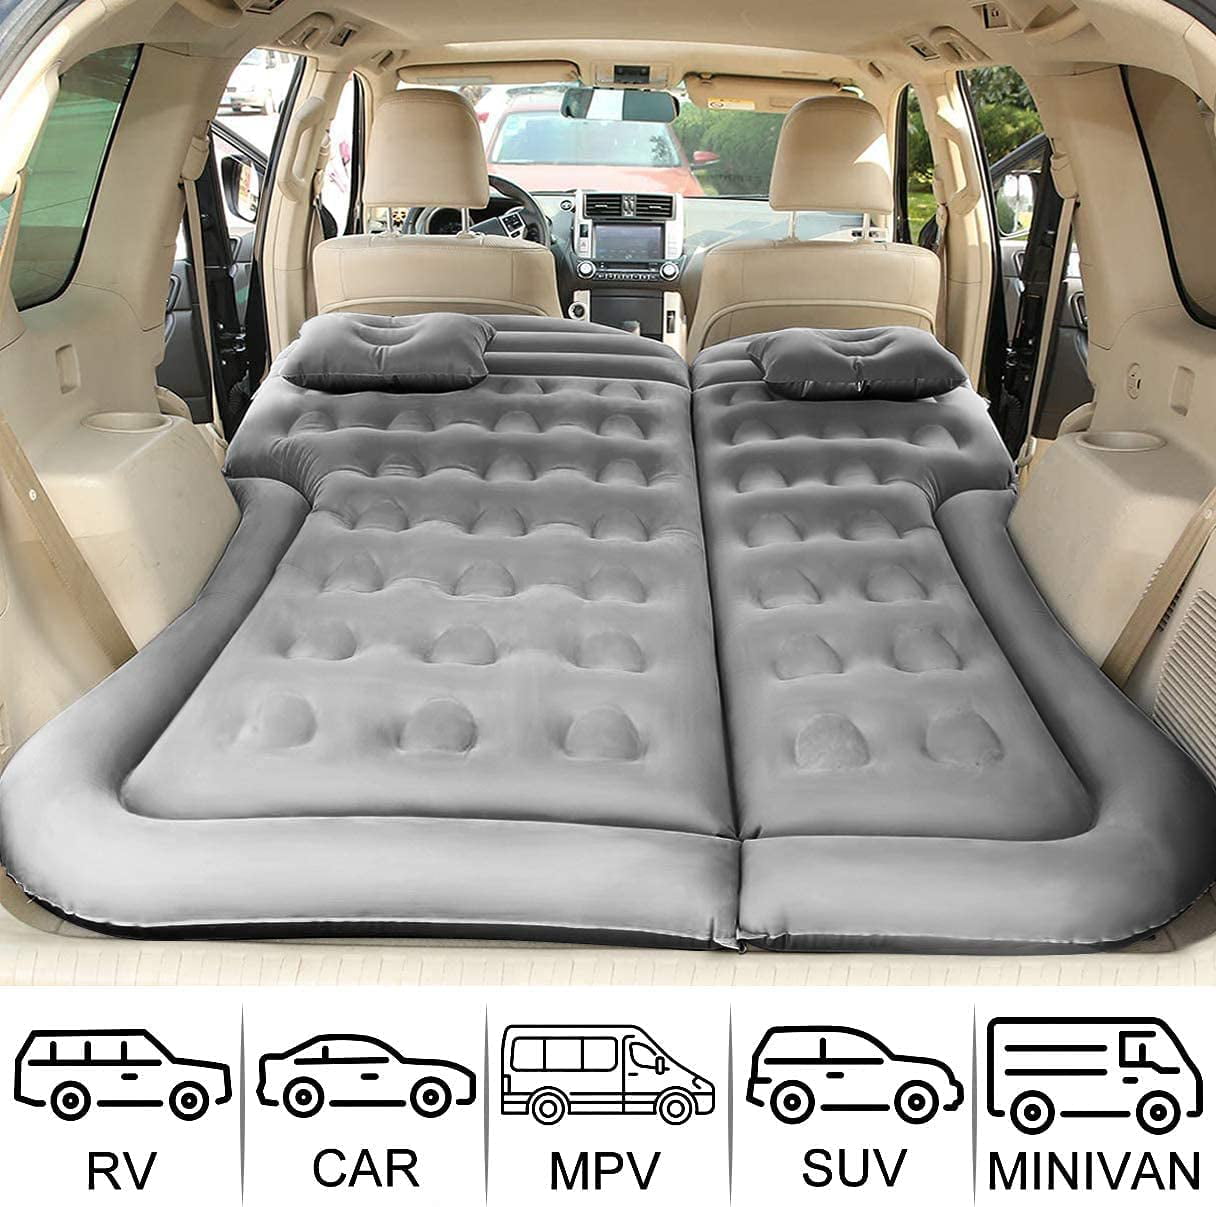 Inflatable Air Mattress Portable Car Back Seat Bed Travel Inflatable Sleeping Pad with Air Pillow and Electric Pump for SUV Grey Car and MPV Camping 